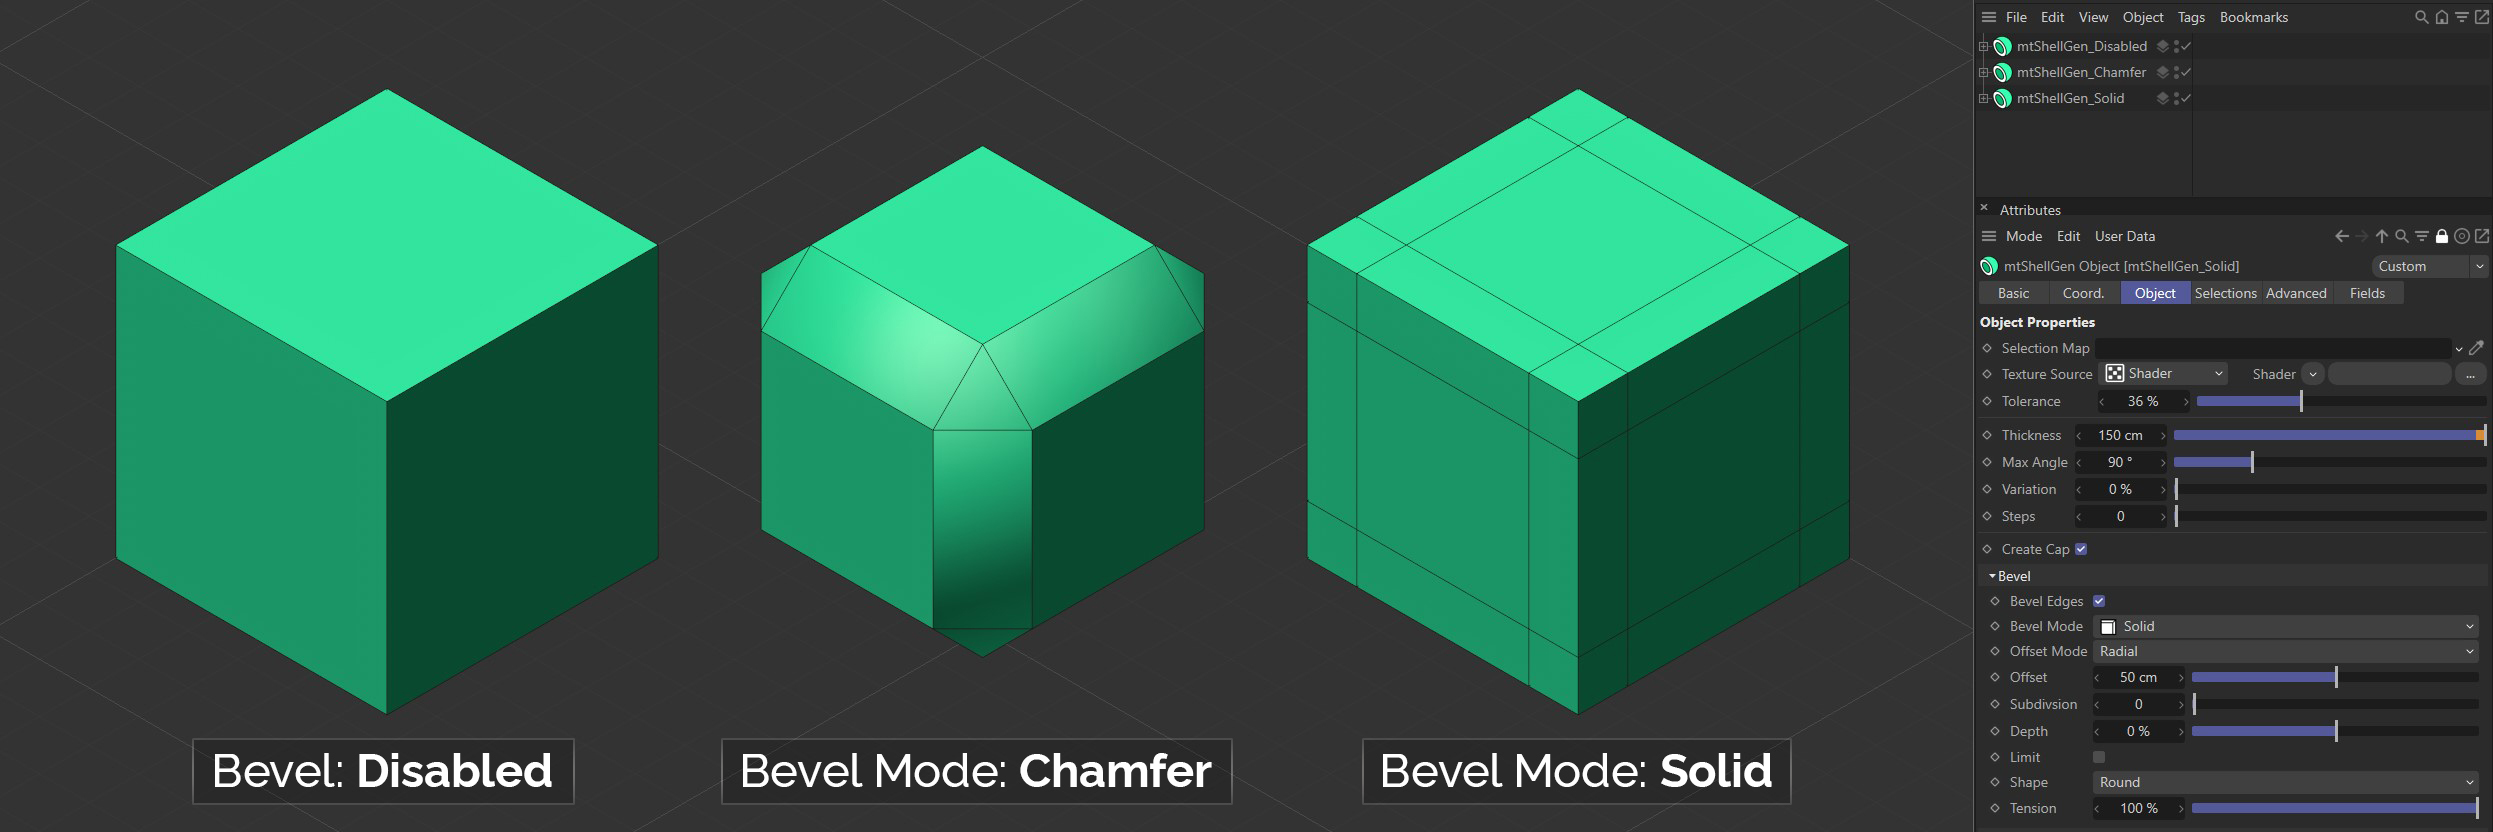 There are two Bevel Mode settings to choose from: Chamfer and Solid.